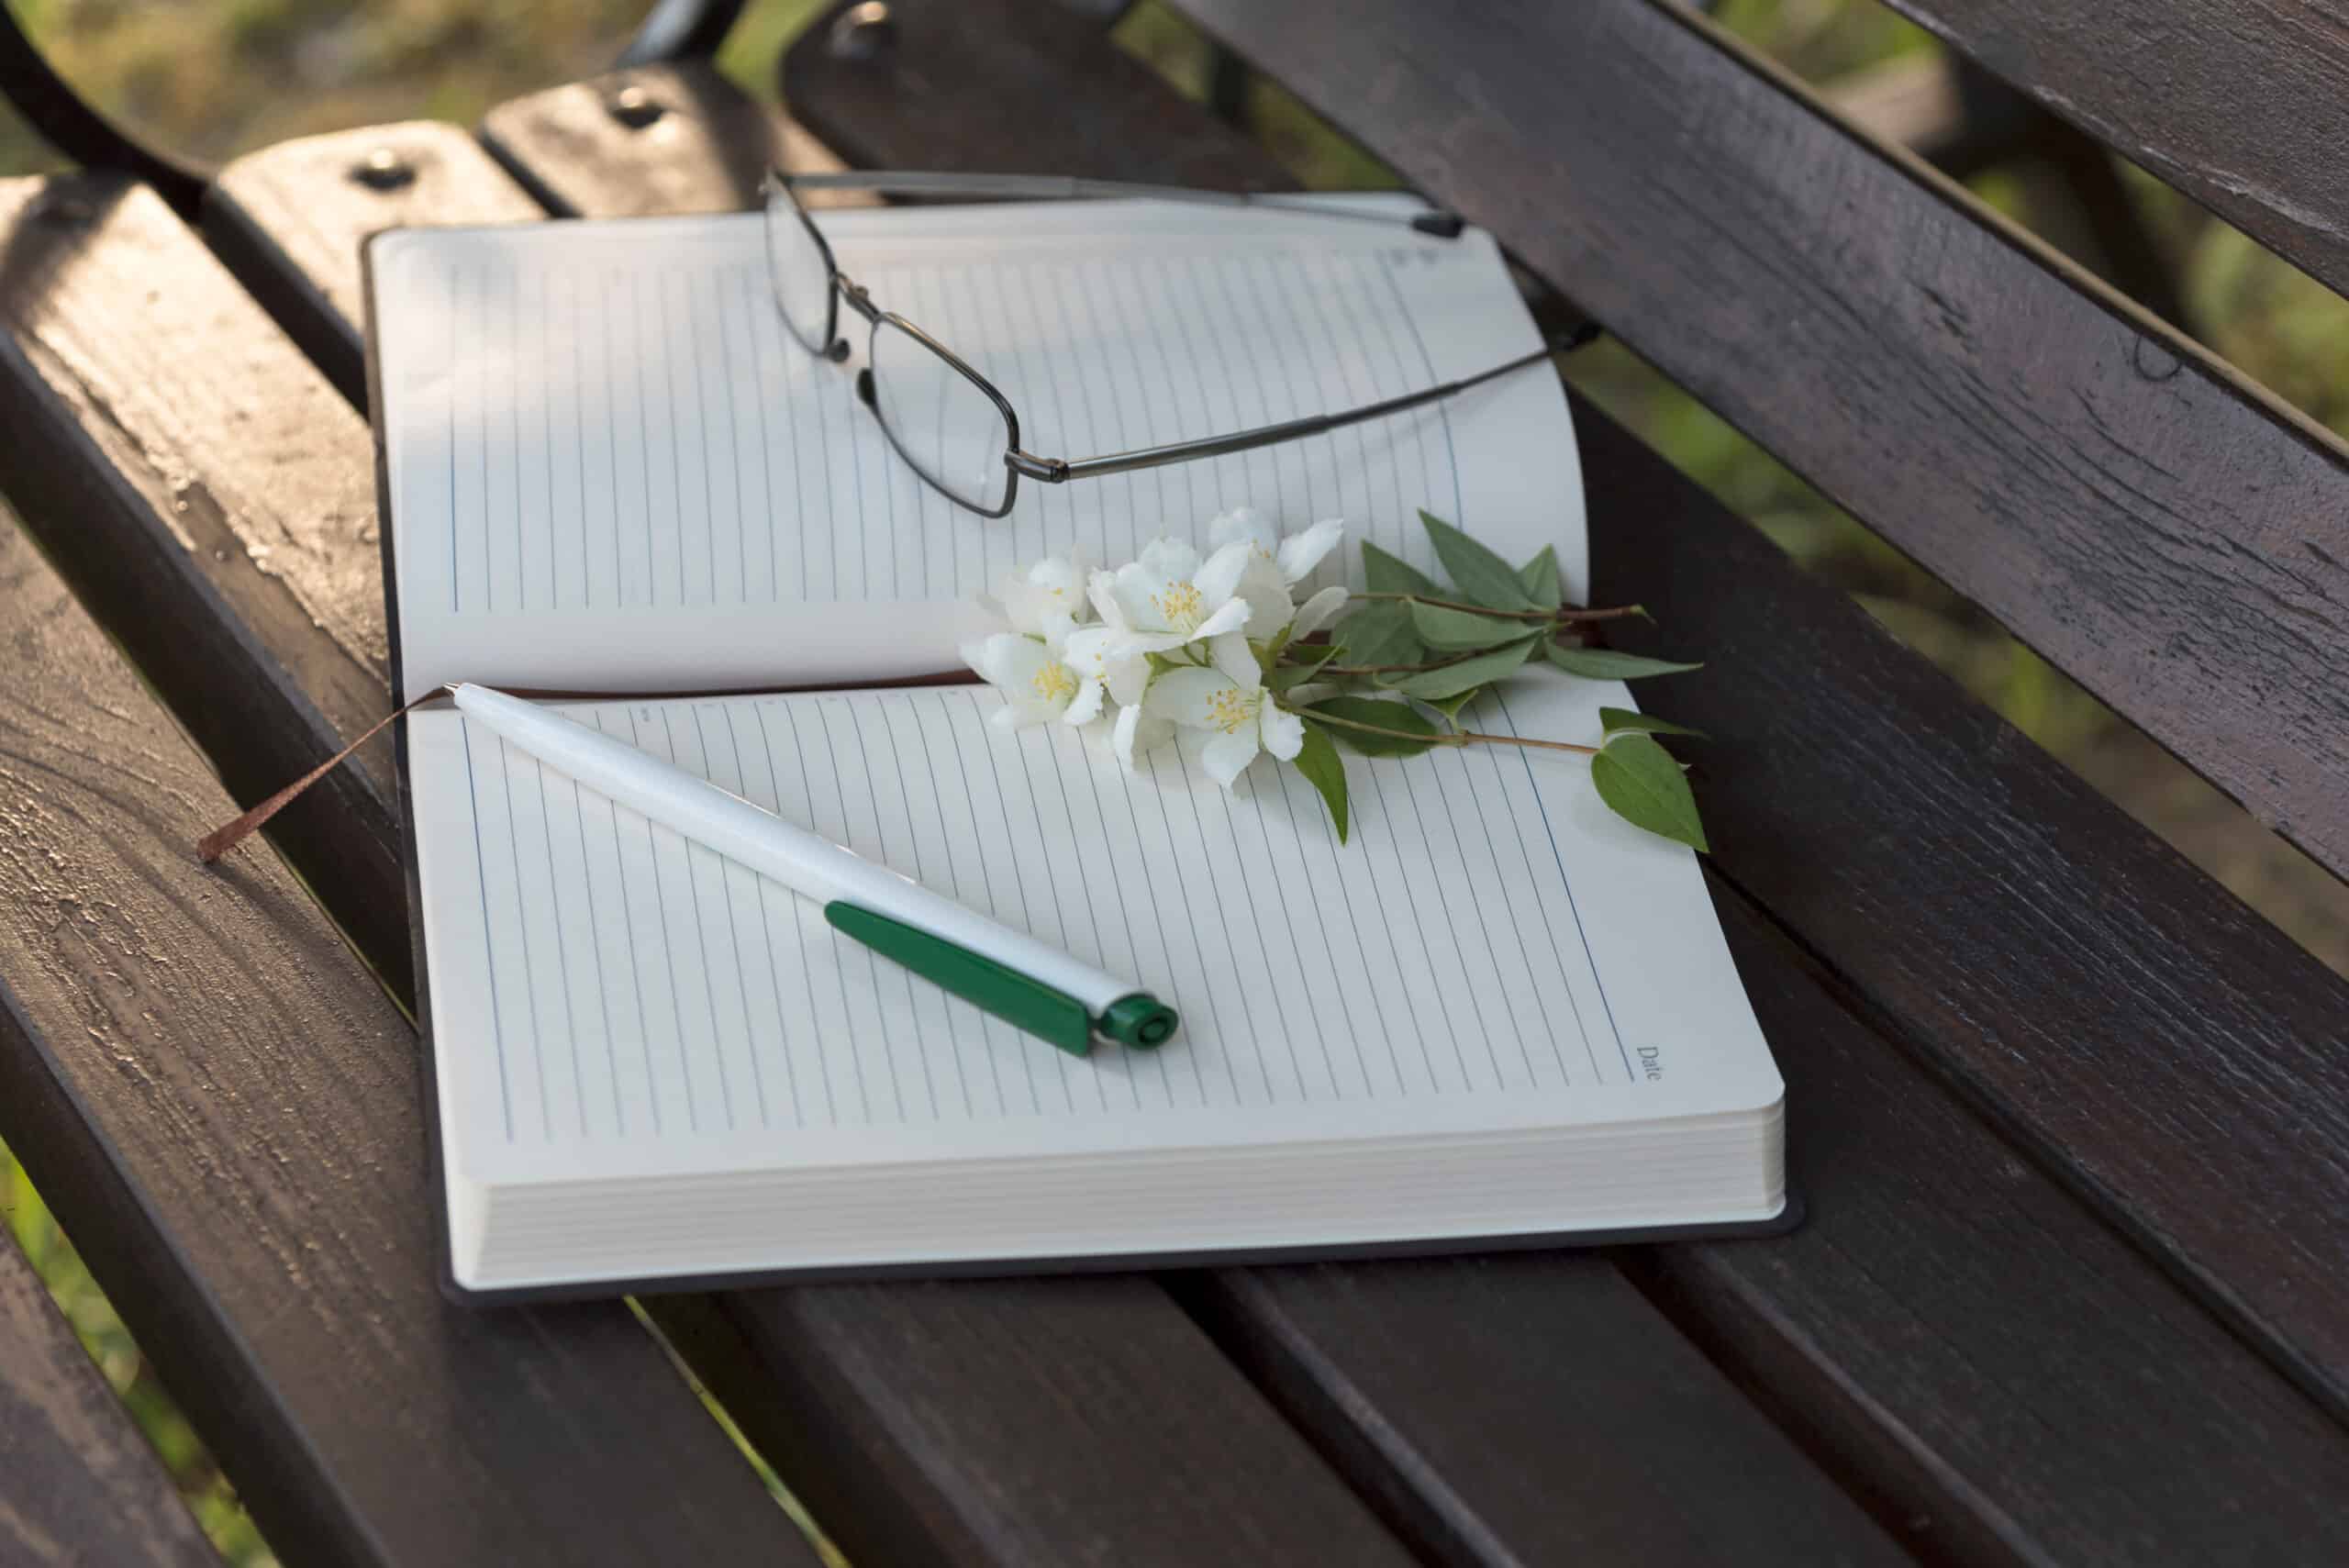 Diary, reading glasses, Jasmine flowers on the park bench.